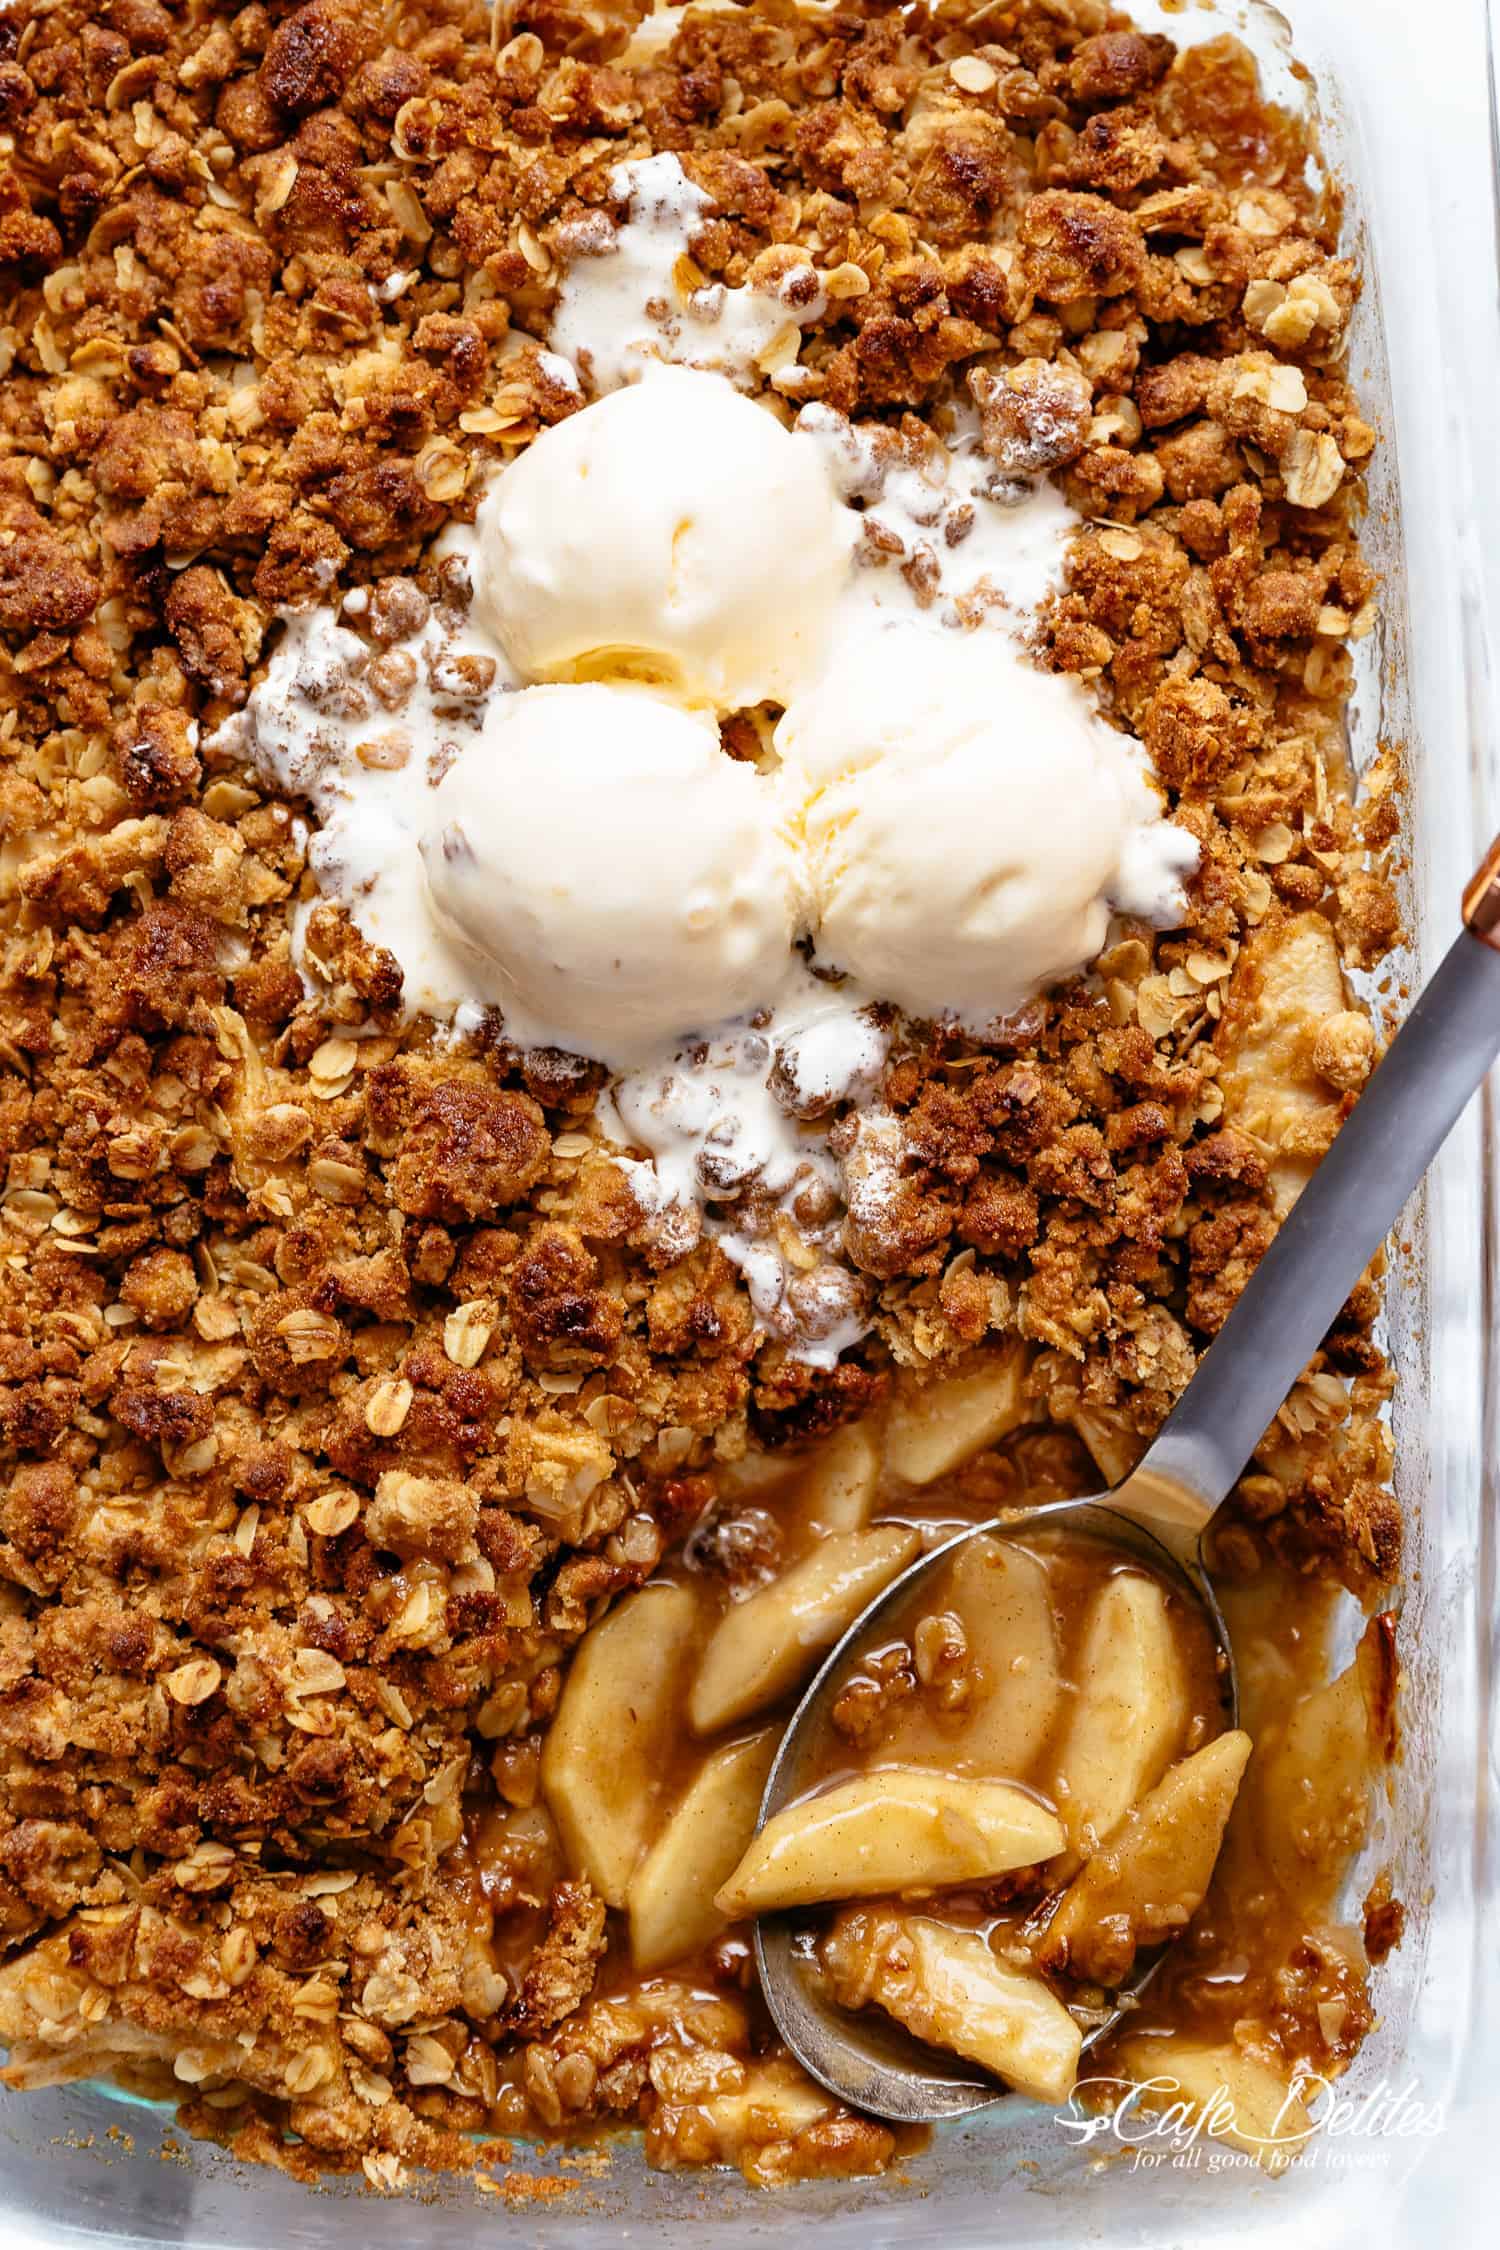 Easy Cinnamon Apple Crumble is foolproof! A juicy apple pie filling is covered with a crispy oatmeal cookie-like topping! BEST apple crumble!